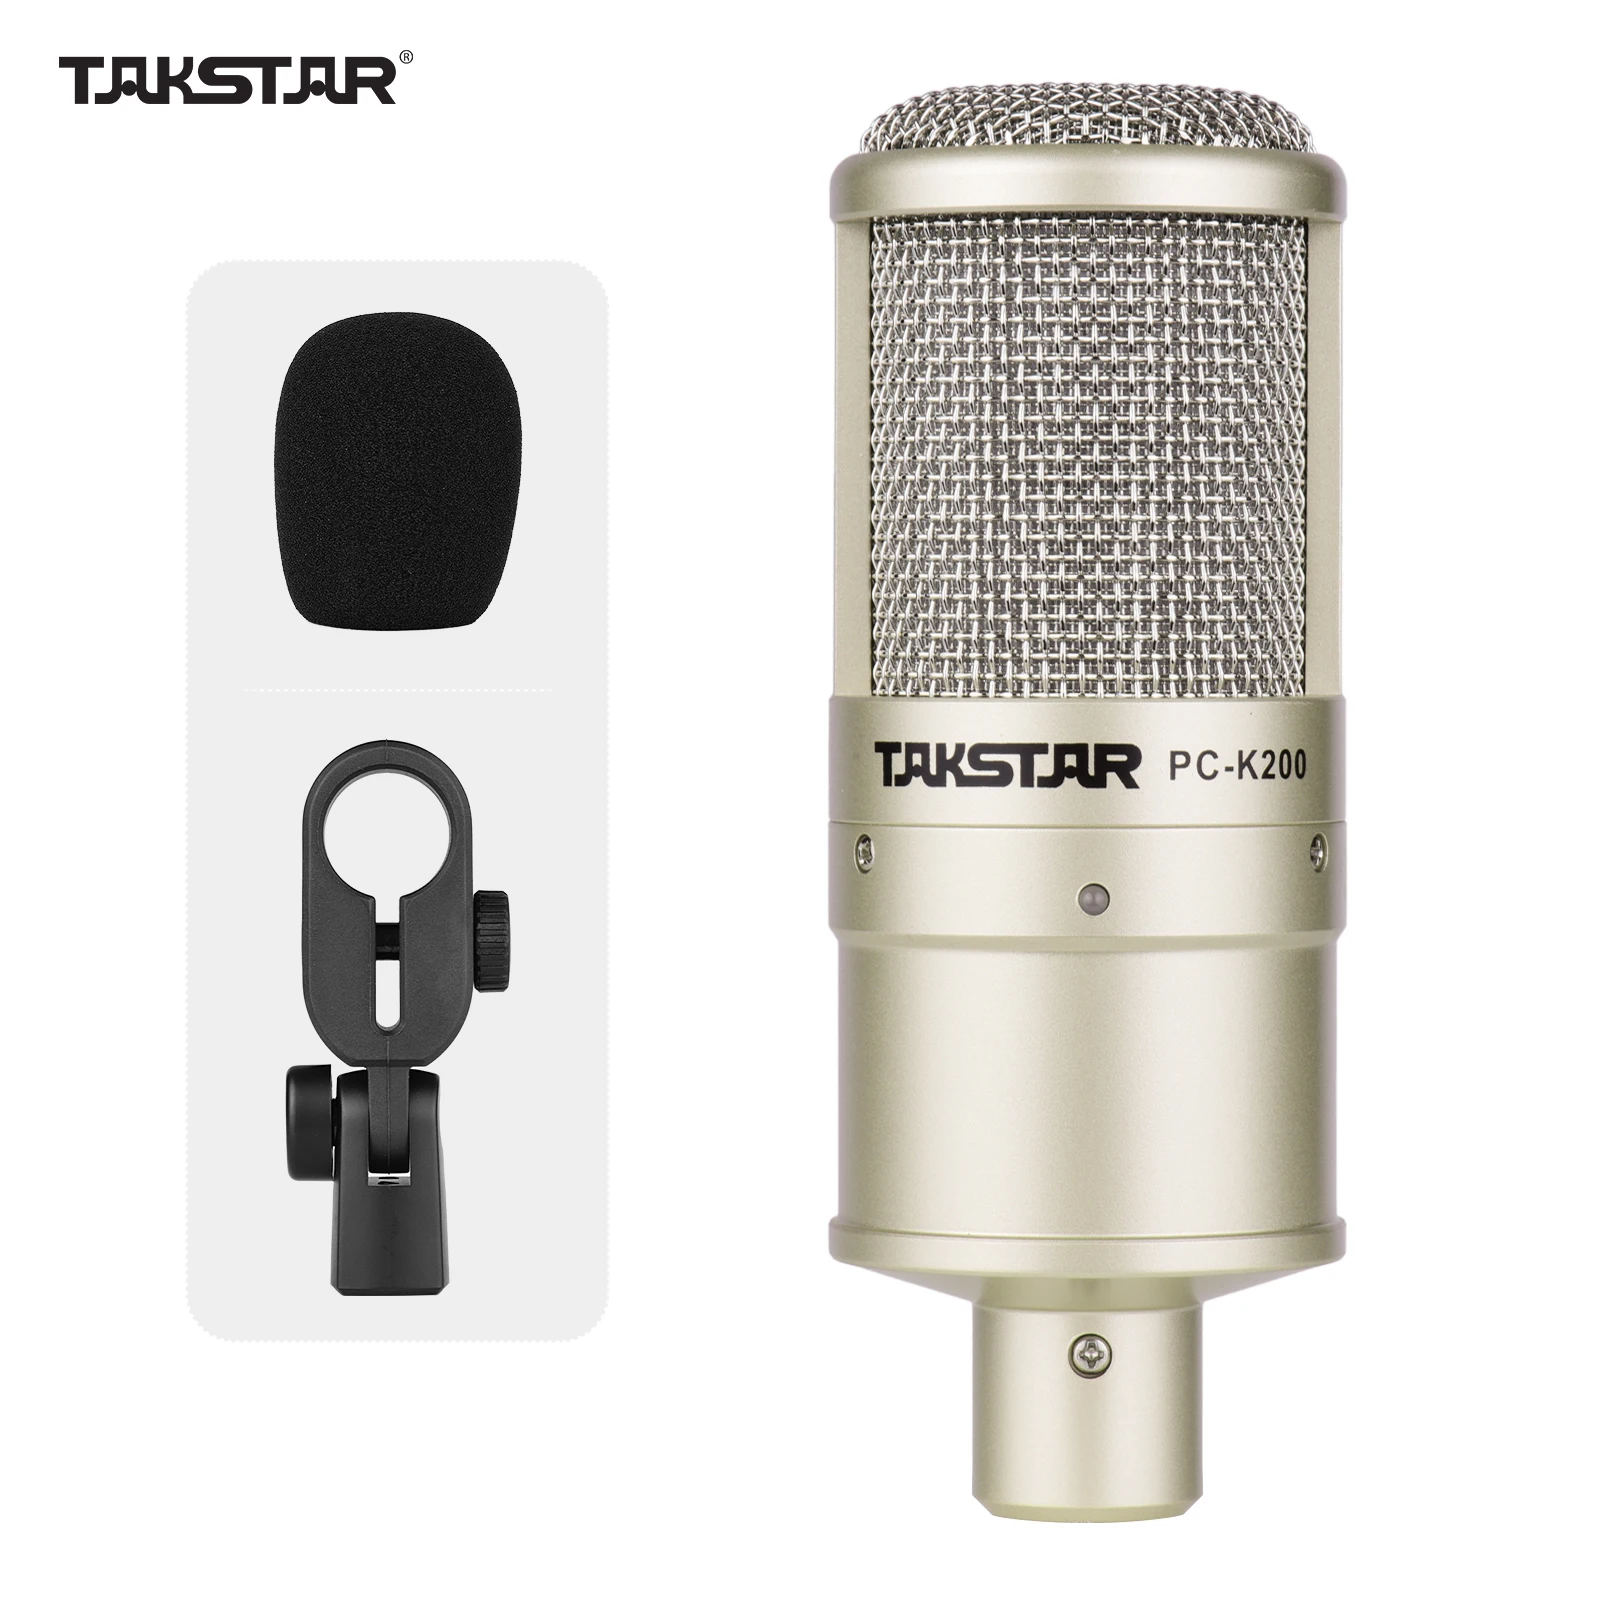 

TAKSTAR PC-K200 Cardioid-directional Condenser Recording Microphone Metal Structure Wide Frequency Response with Shock Mount